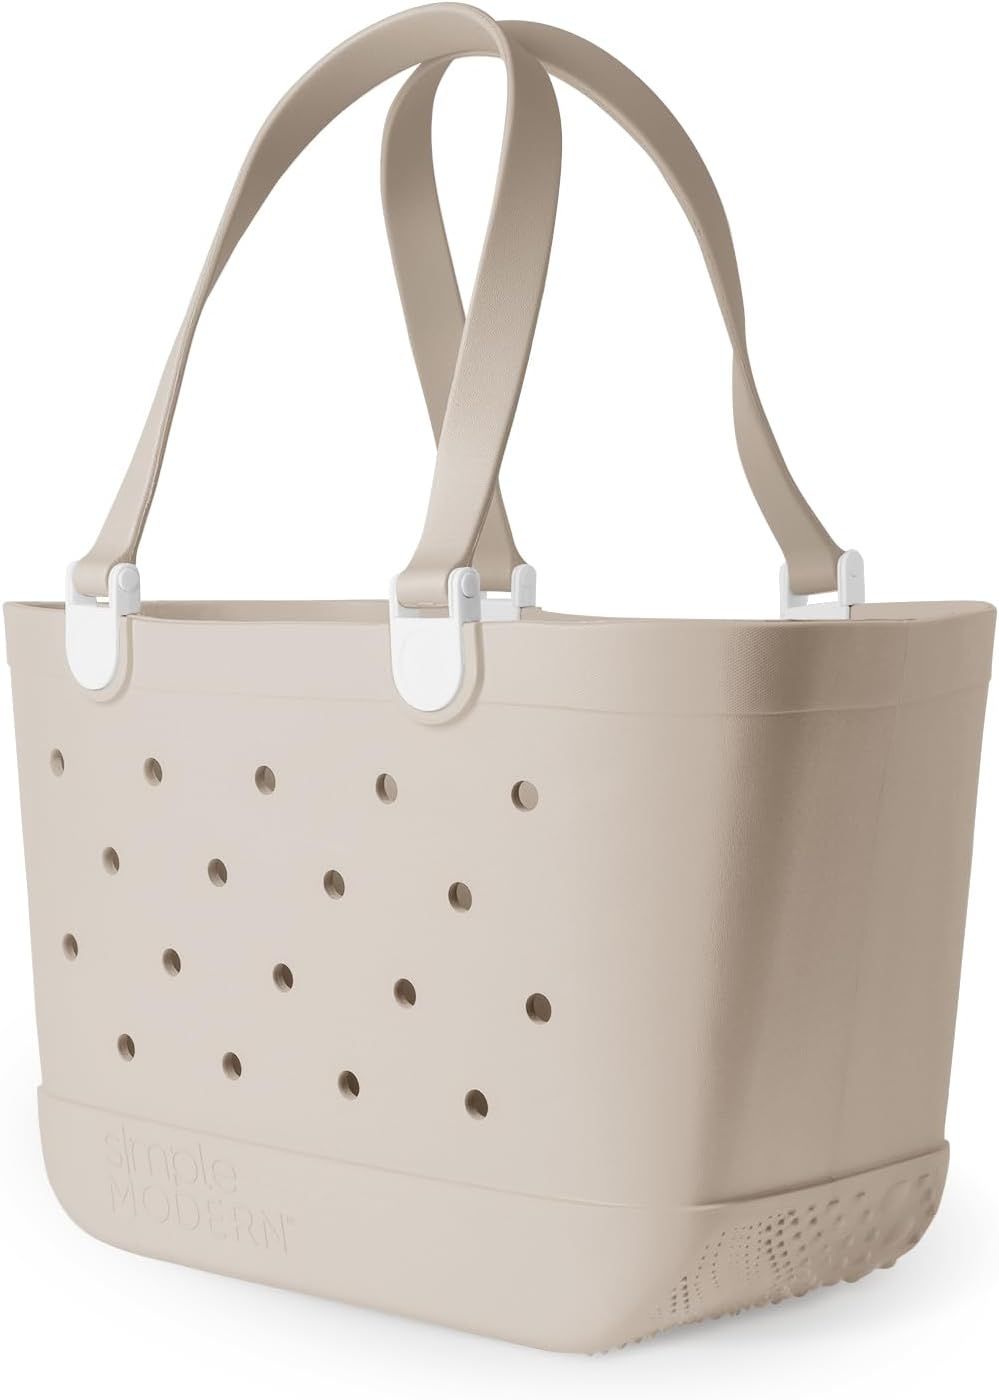 Simple Modern Beach Bag Rubber Tote | Waterproof Large Tote Bag with Zipper Pocket for Beach, Poo... | Amazon (US)